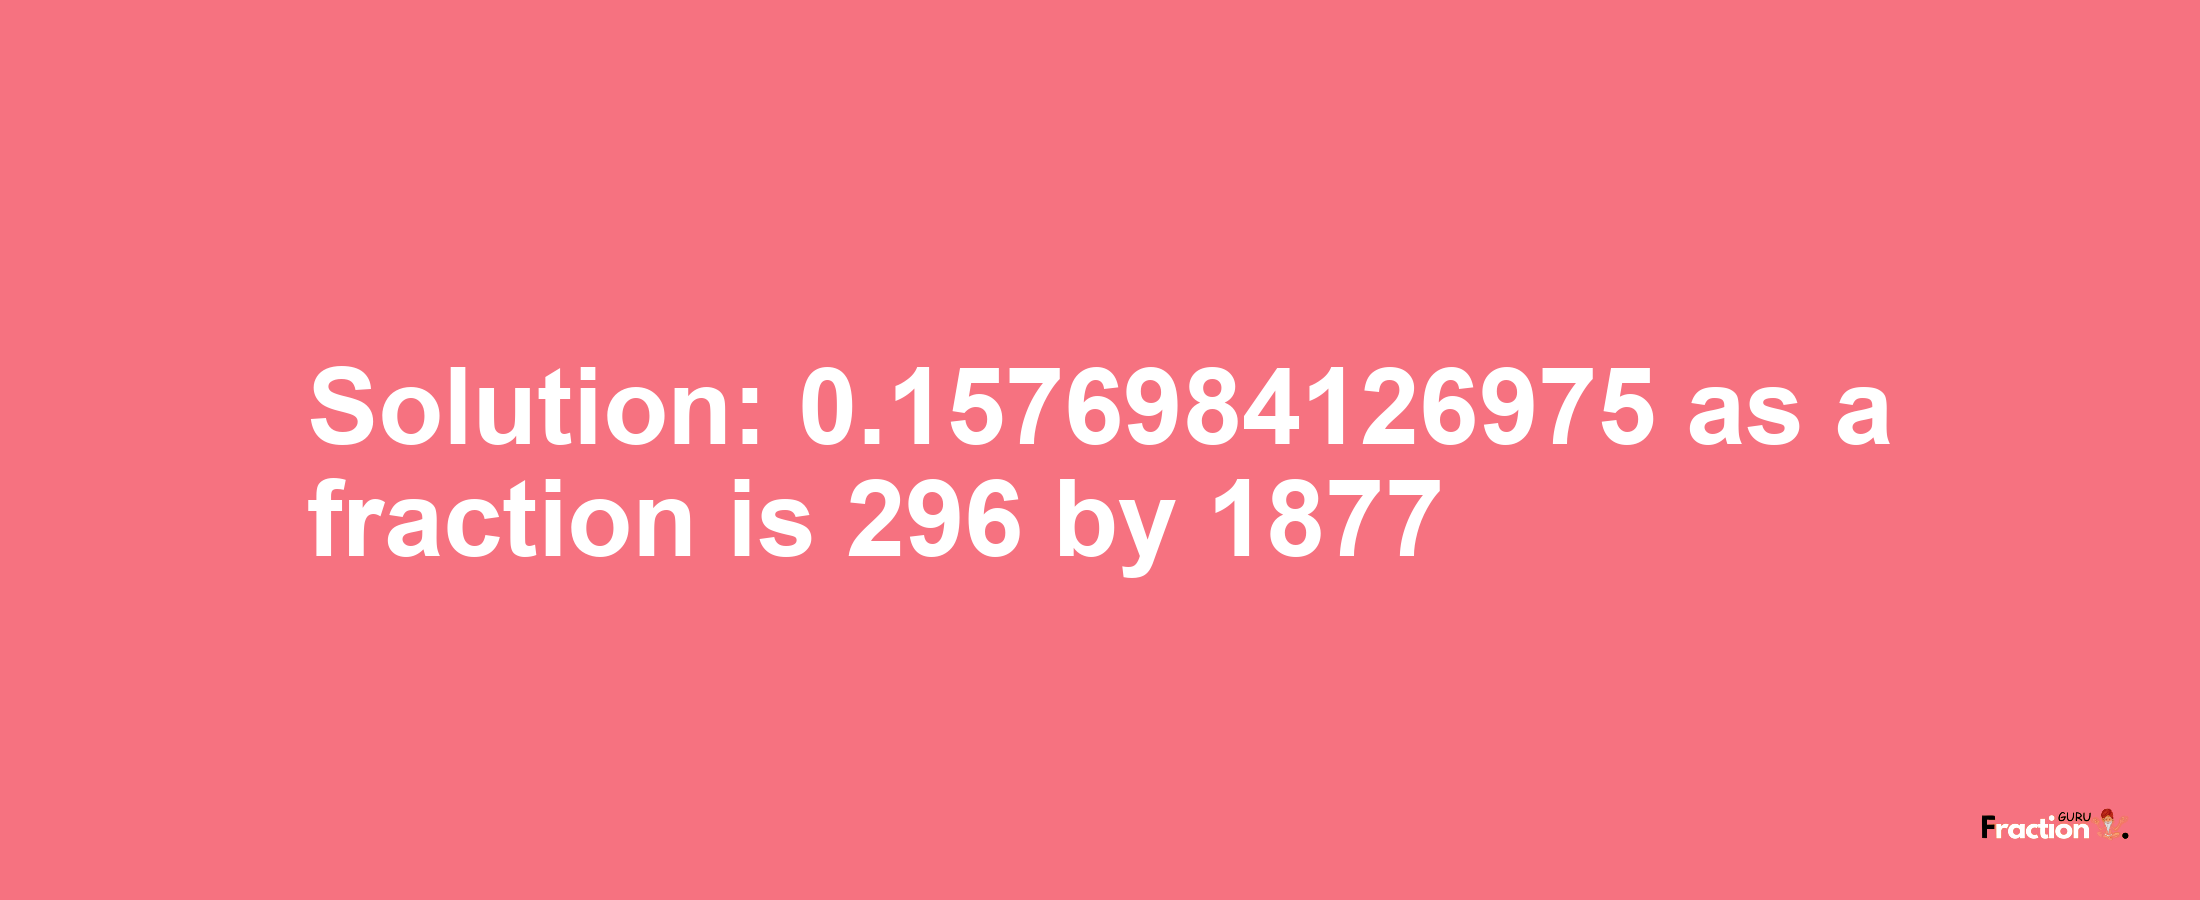 Solution:0.1576984126975 as a fraction is 296/1877